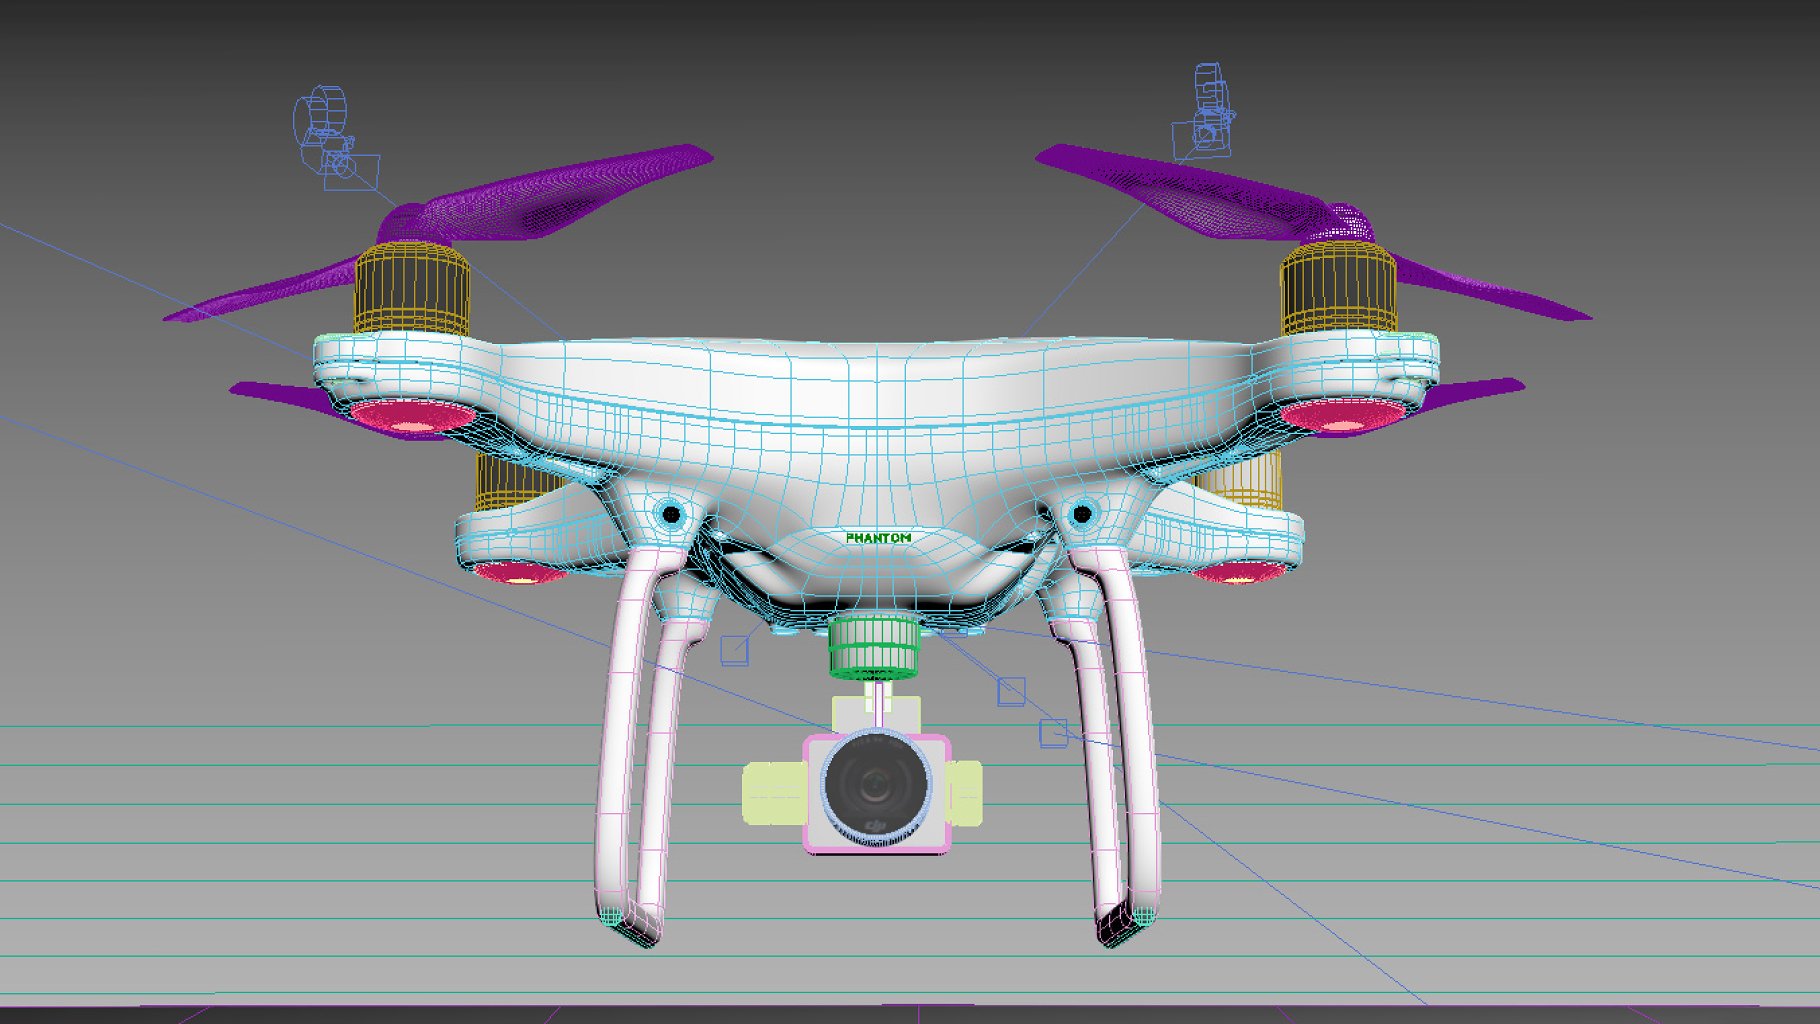 Images of a charming 3d model of a white dji phantom 4 drone